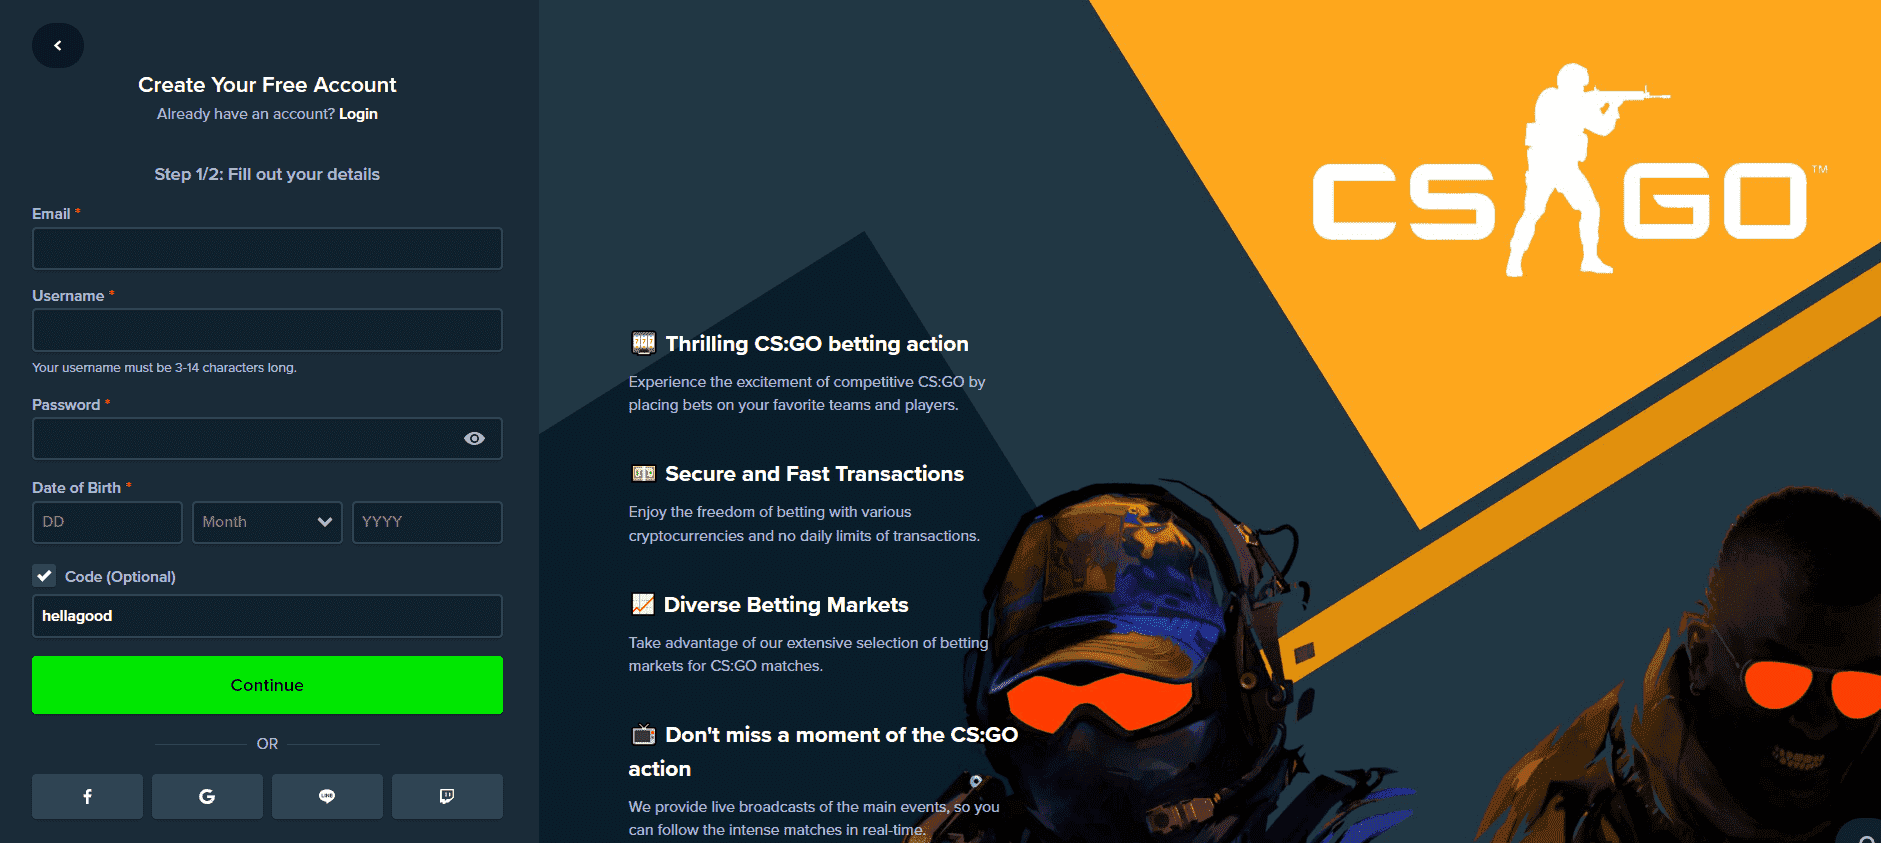 Counter-Strike 2 Betting Sites 2023